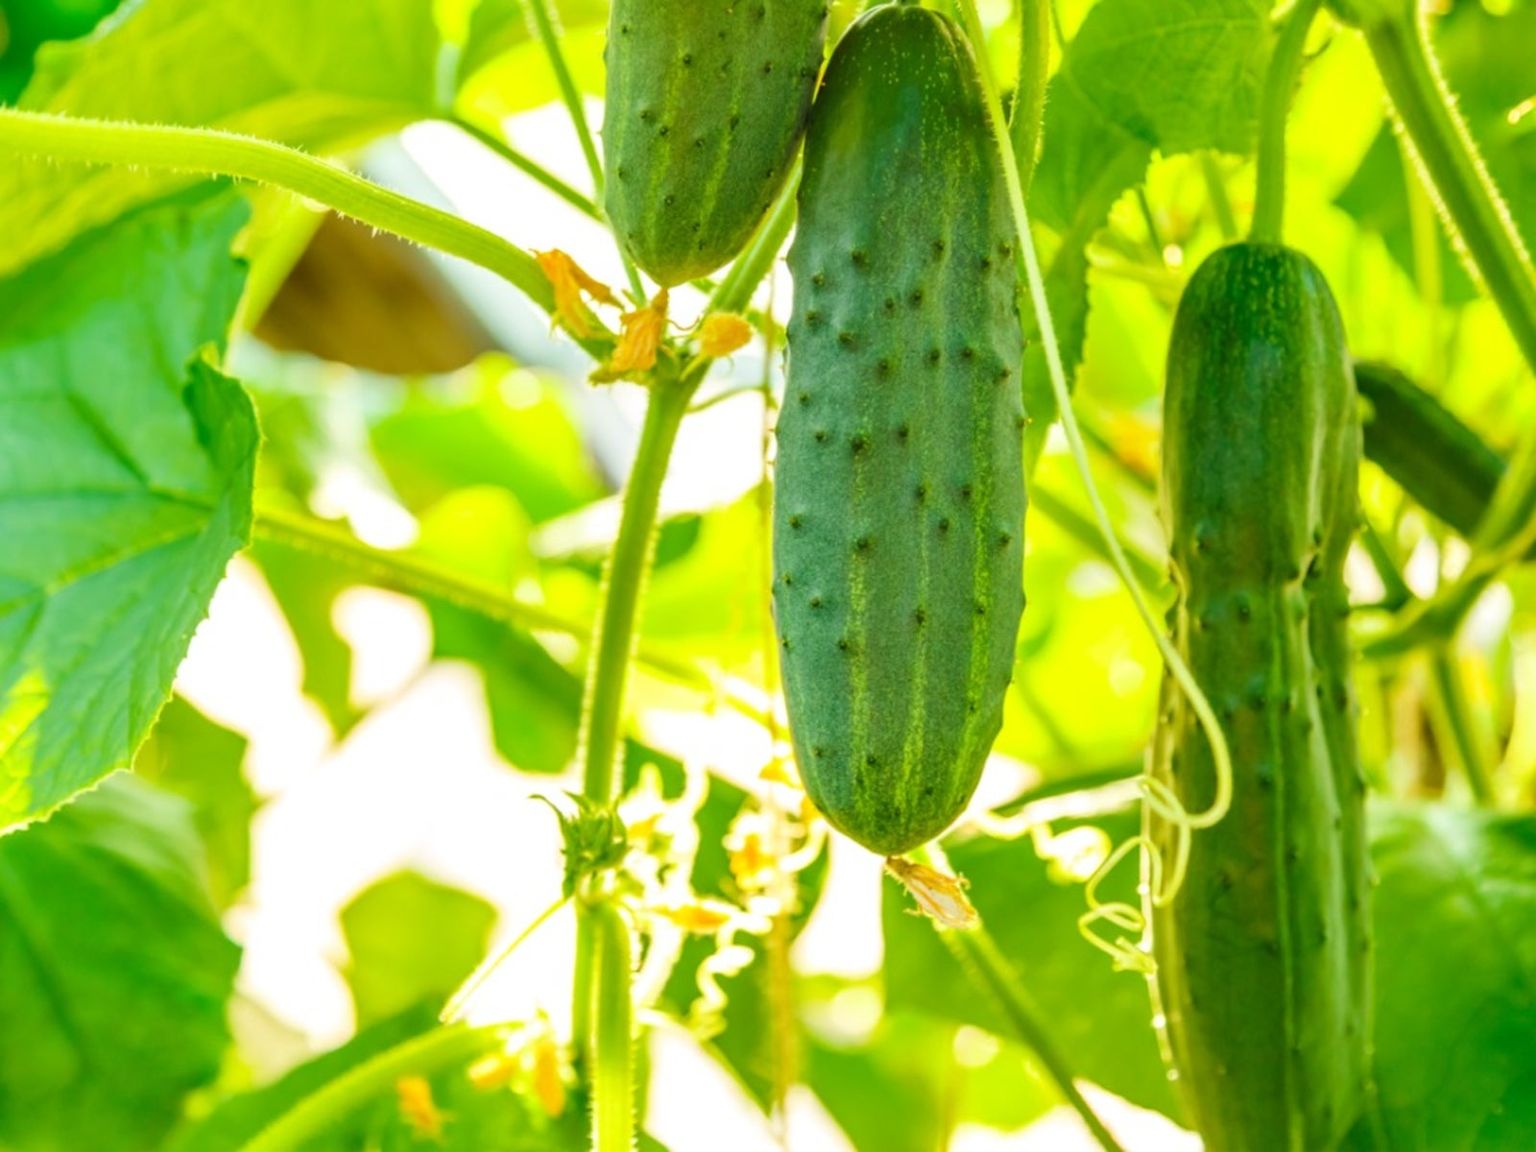 Tips For Growing Cucumbers: How To Grow Cucumbers